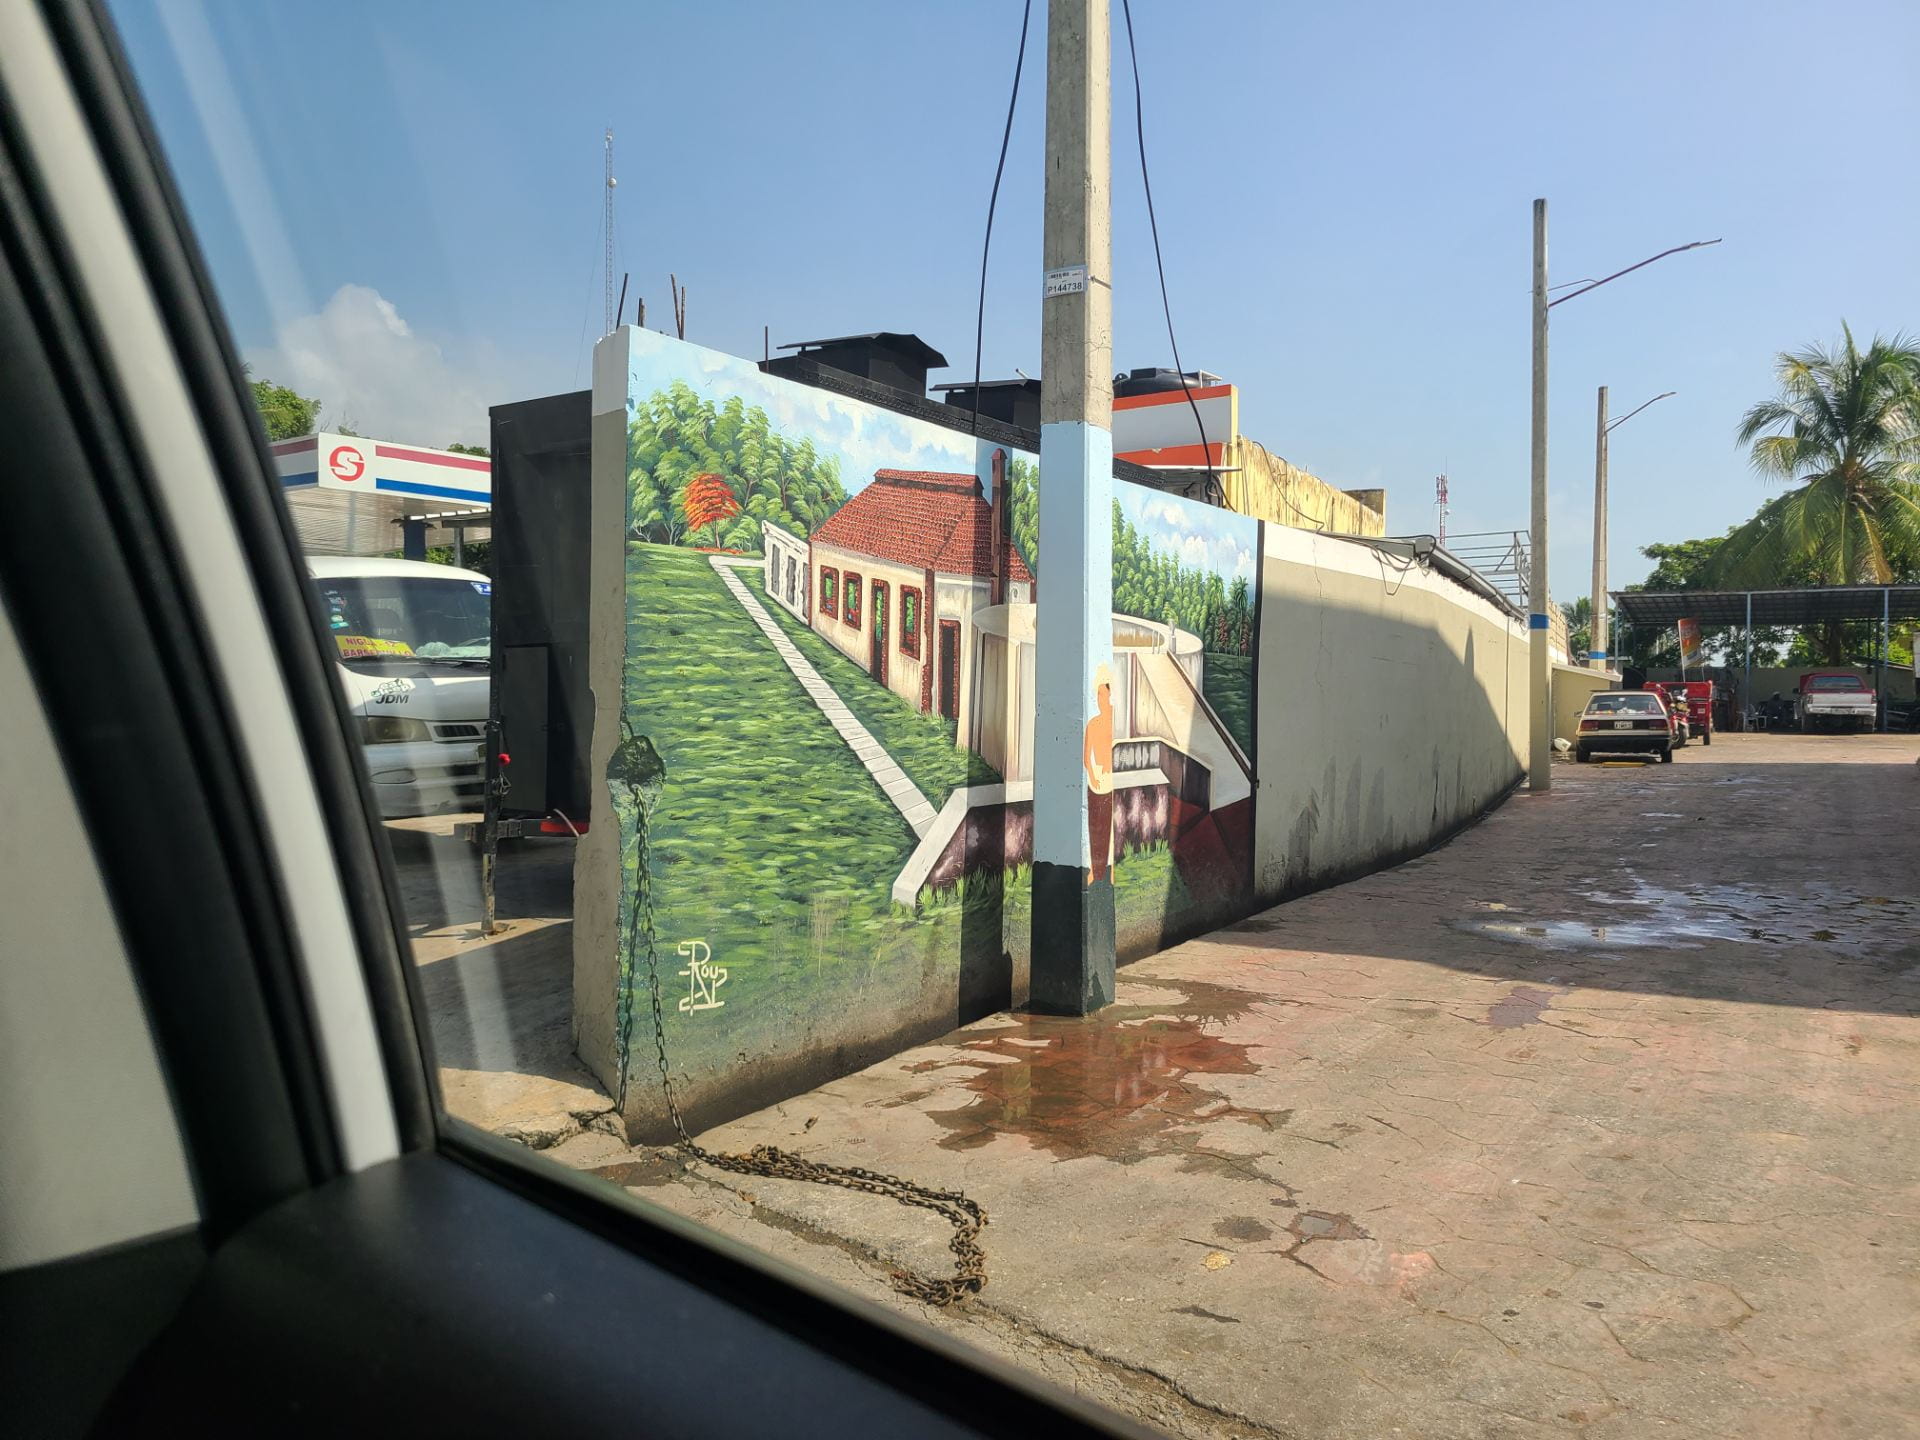 A view from a car window into an alley with a colorful mural depicting a house surrounded by greenery